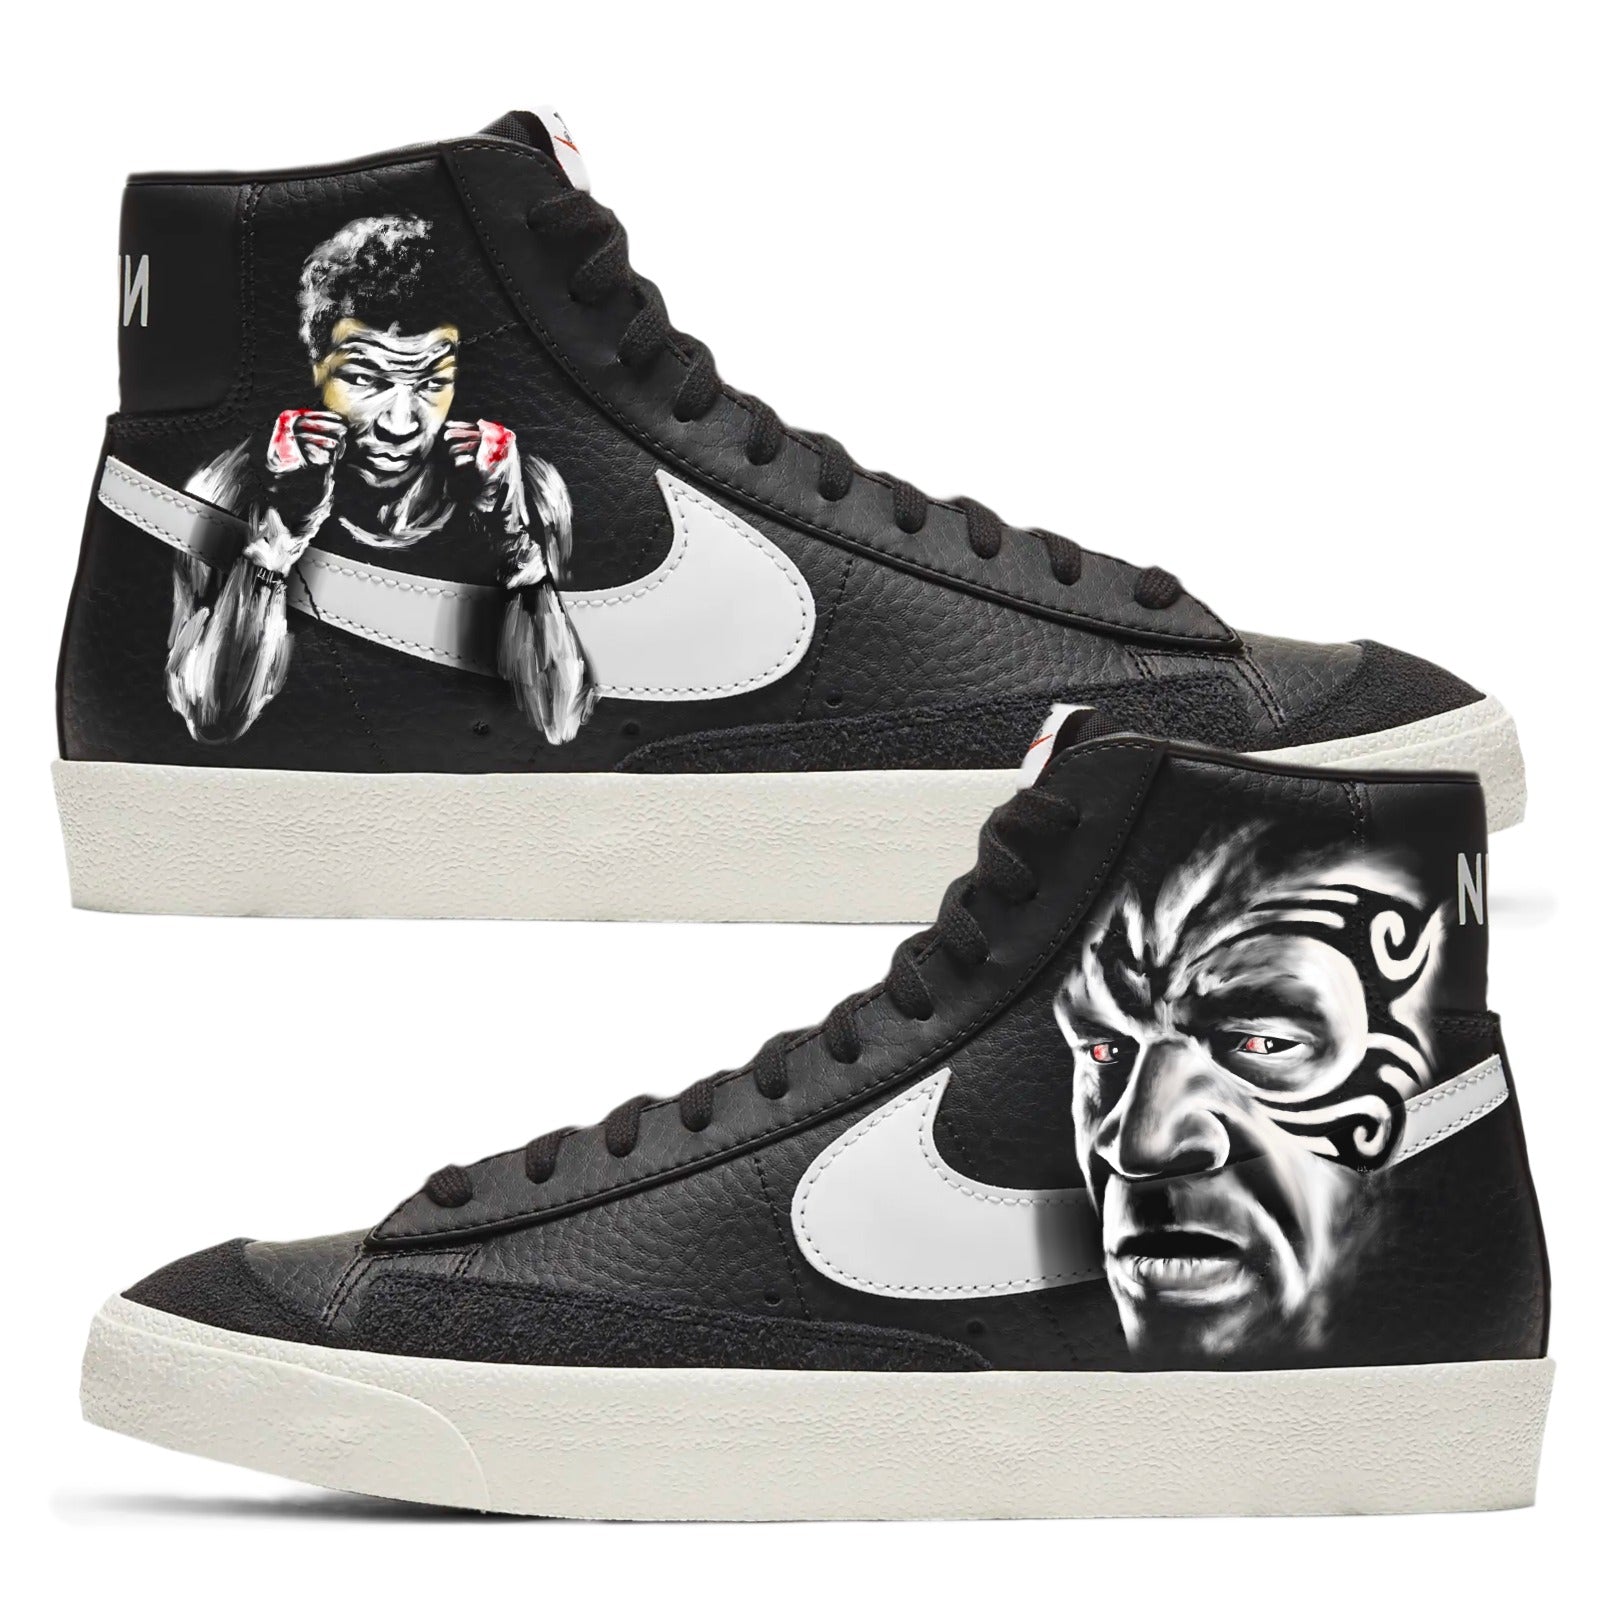 Nike Blazer Mid Sneakers | Black and White | "Iron Mike" - Androo's Art